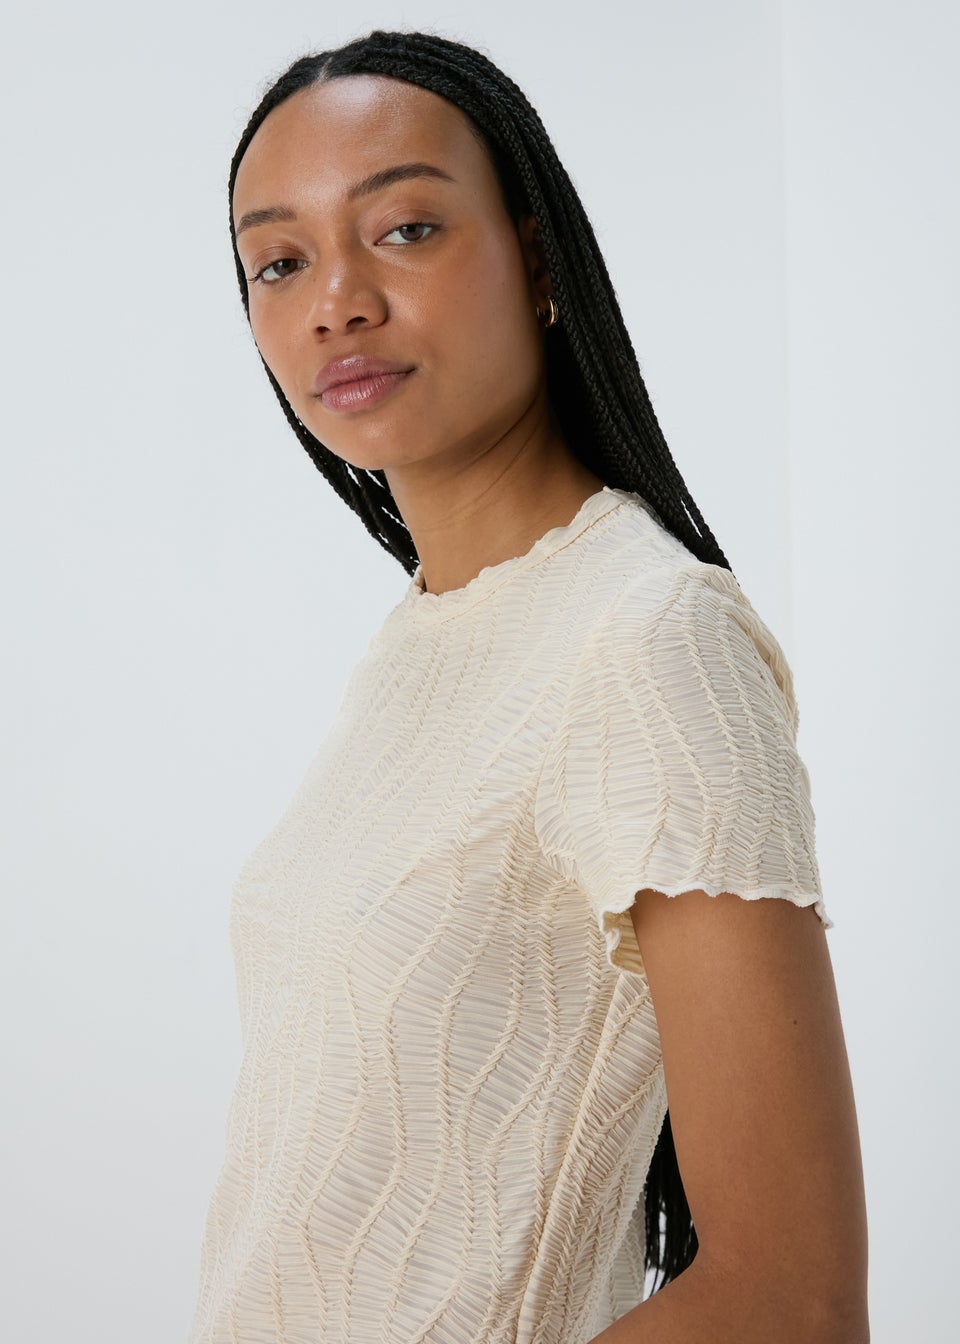 Ivory Short Sleeve Textured Top